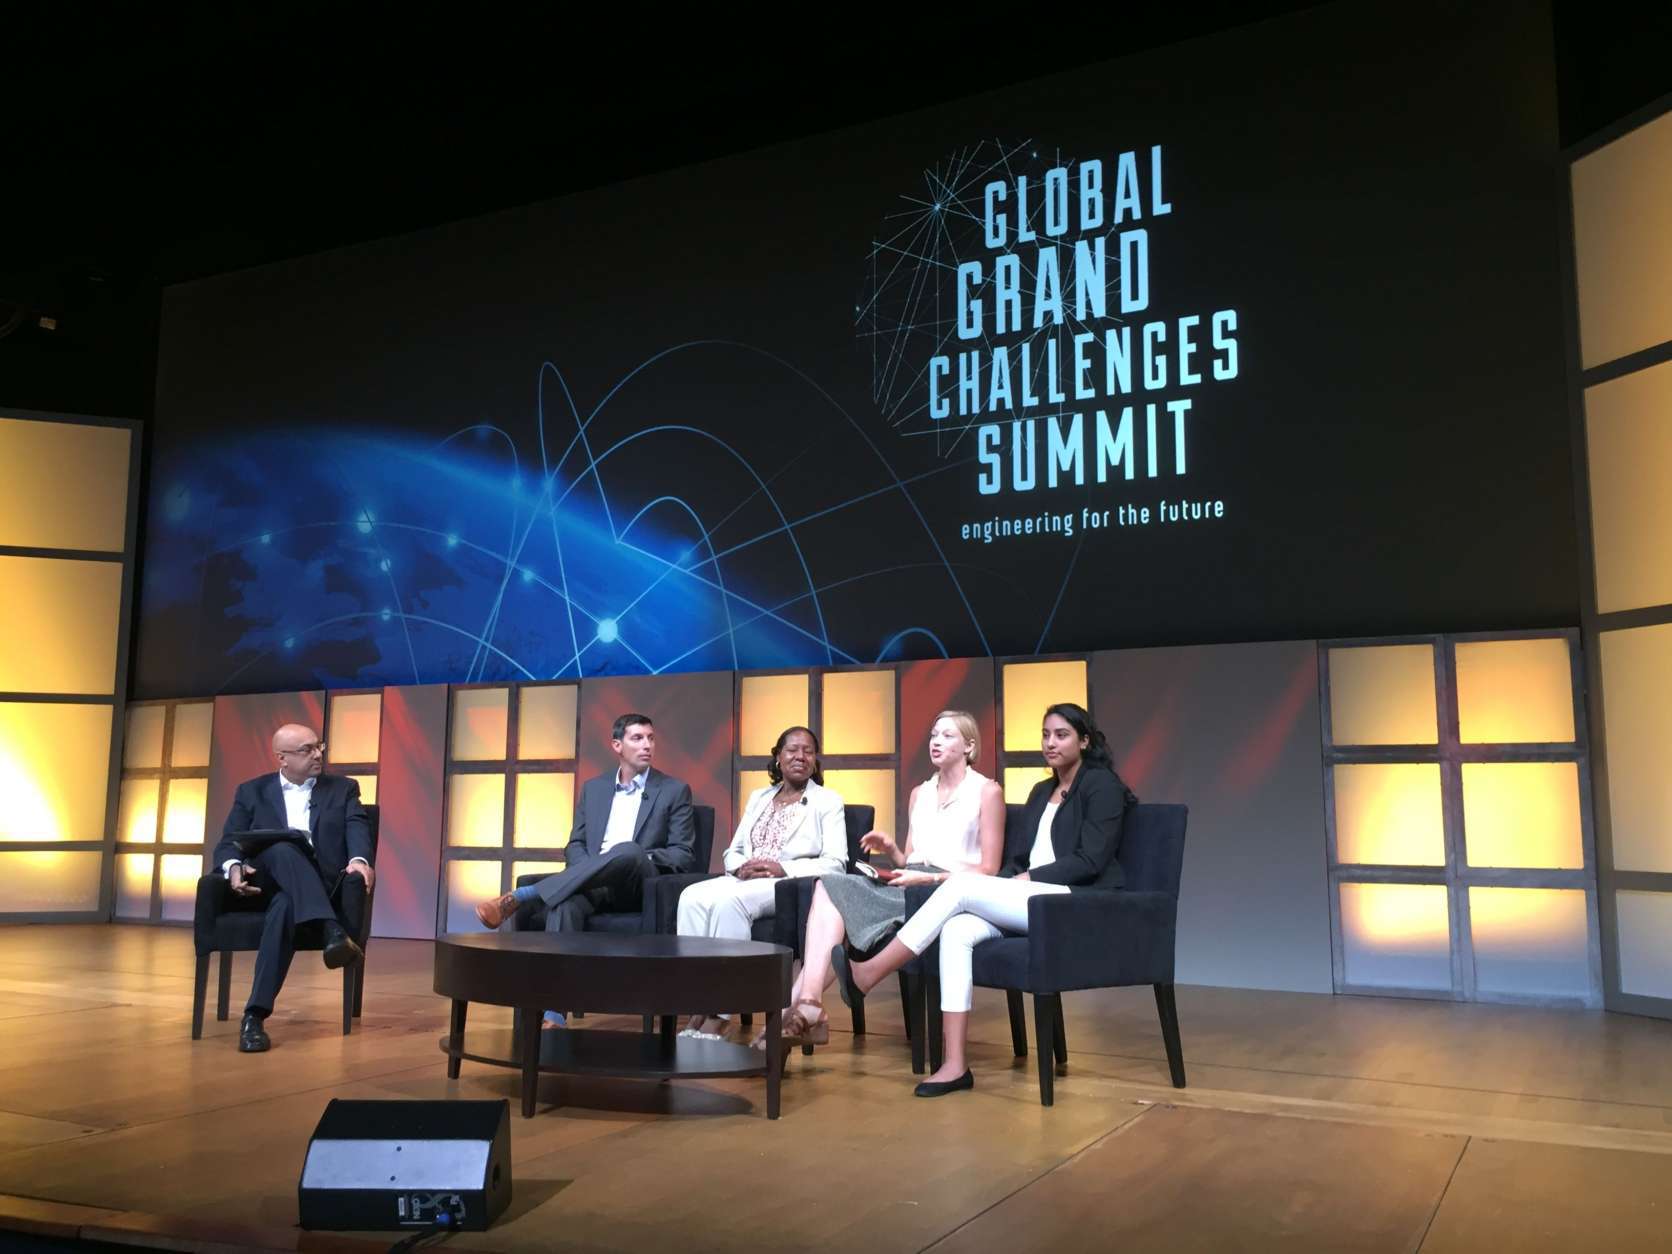 Pictured with http://www.engineeringchallenges.org/challenges.aspx Global Grand Challenges Summit panel moderator Ali Velshi, left to right are Scott Settar, Program Manager, Technology and Engineering Education and STEAM Integration, Fairfax County Public Schools. Pamela Brumfield, Principal, Thomas A. Edison High School of Alexandria. Katherine Shirey, Senior Fellow, Knowles Science Teaching Foundation and Francis Reyes, Global STEM Challenges Student at Edison High.